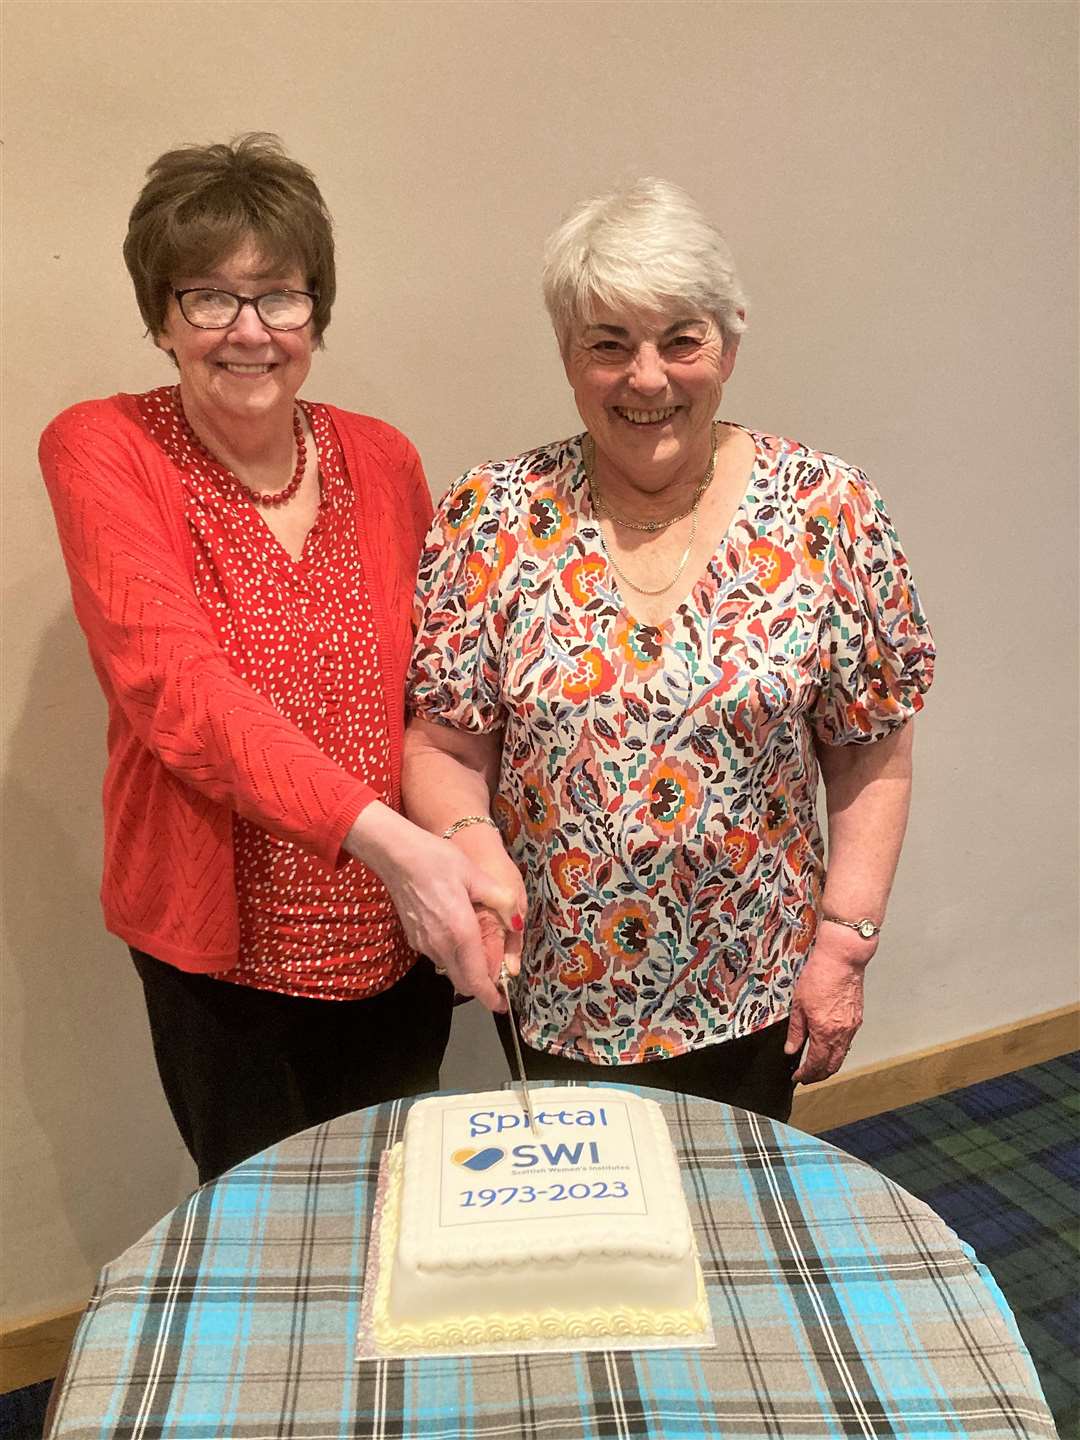 Spittal SWI founder members Jean Watt, left, and Linda Levack cutting the special 50th birthday cake.